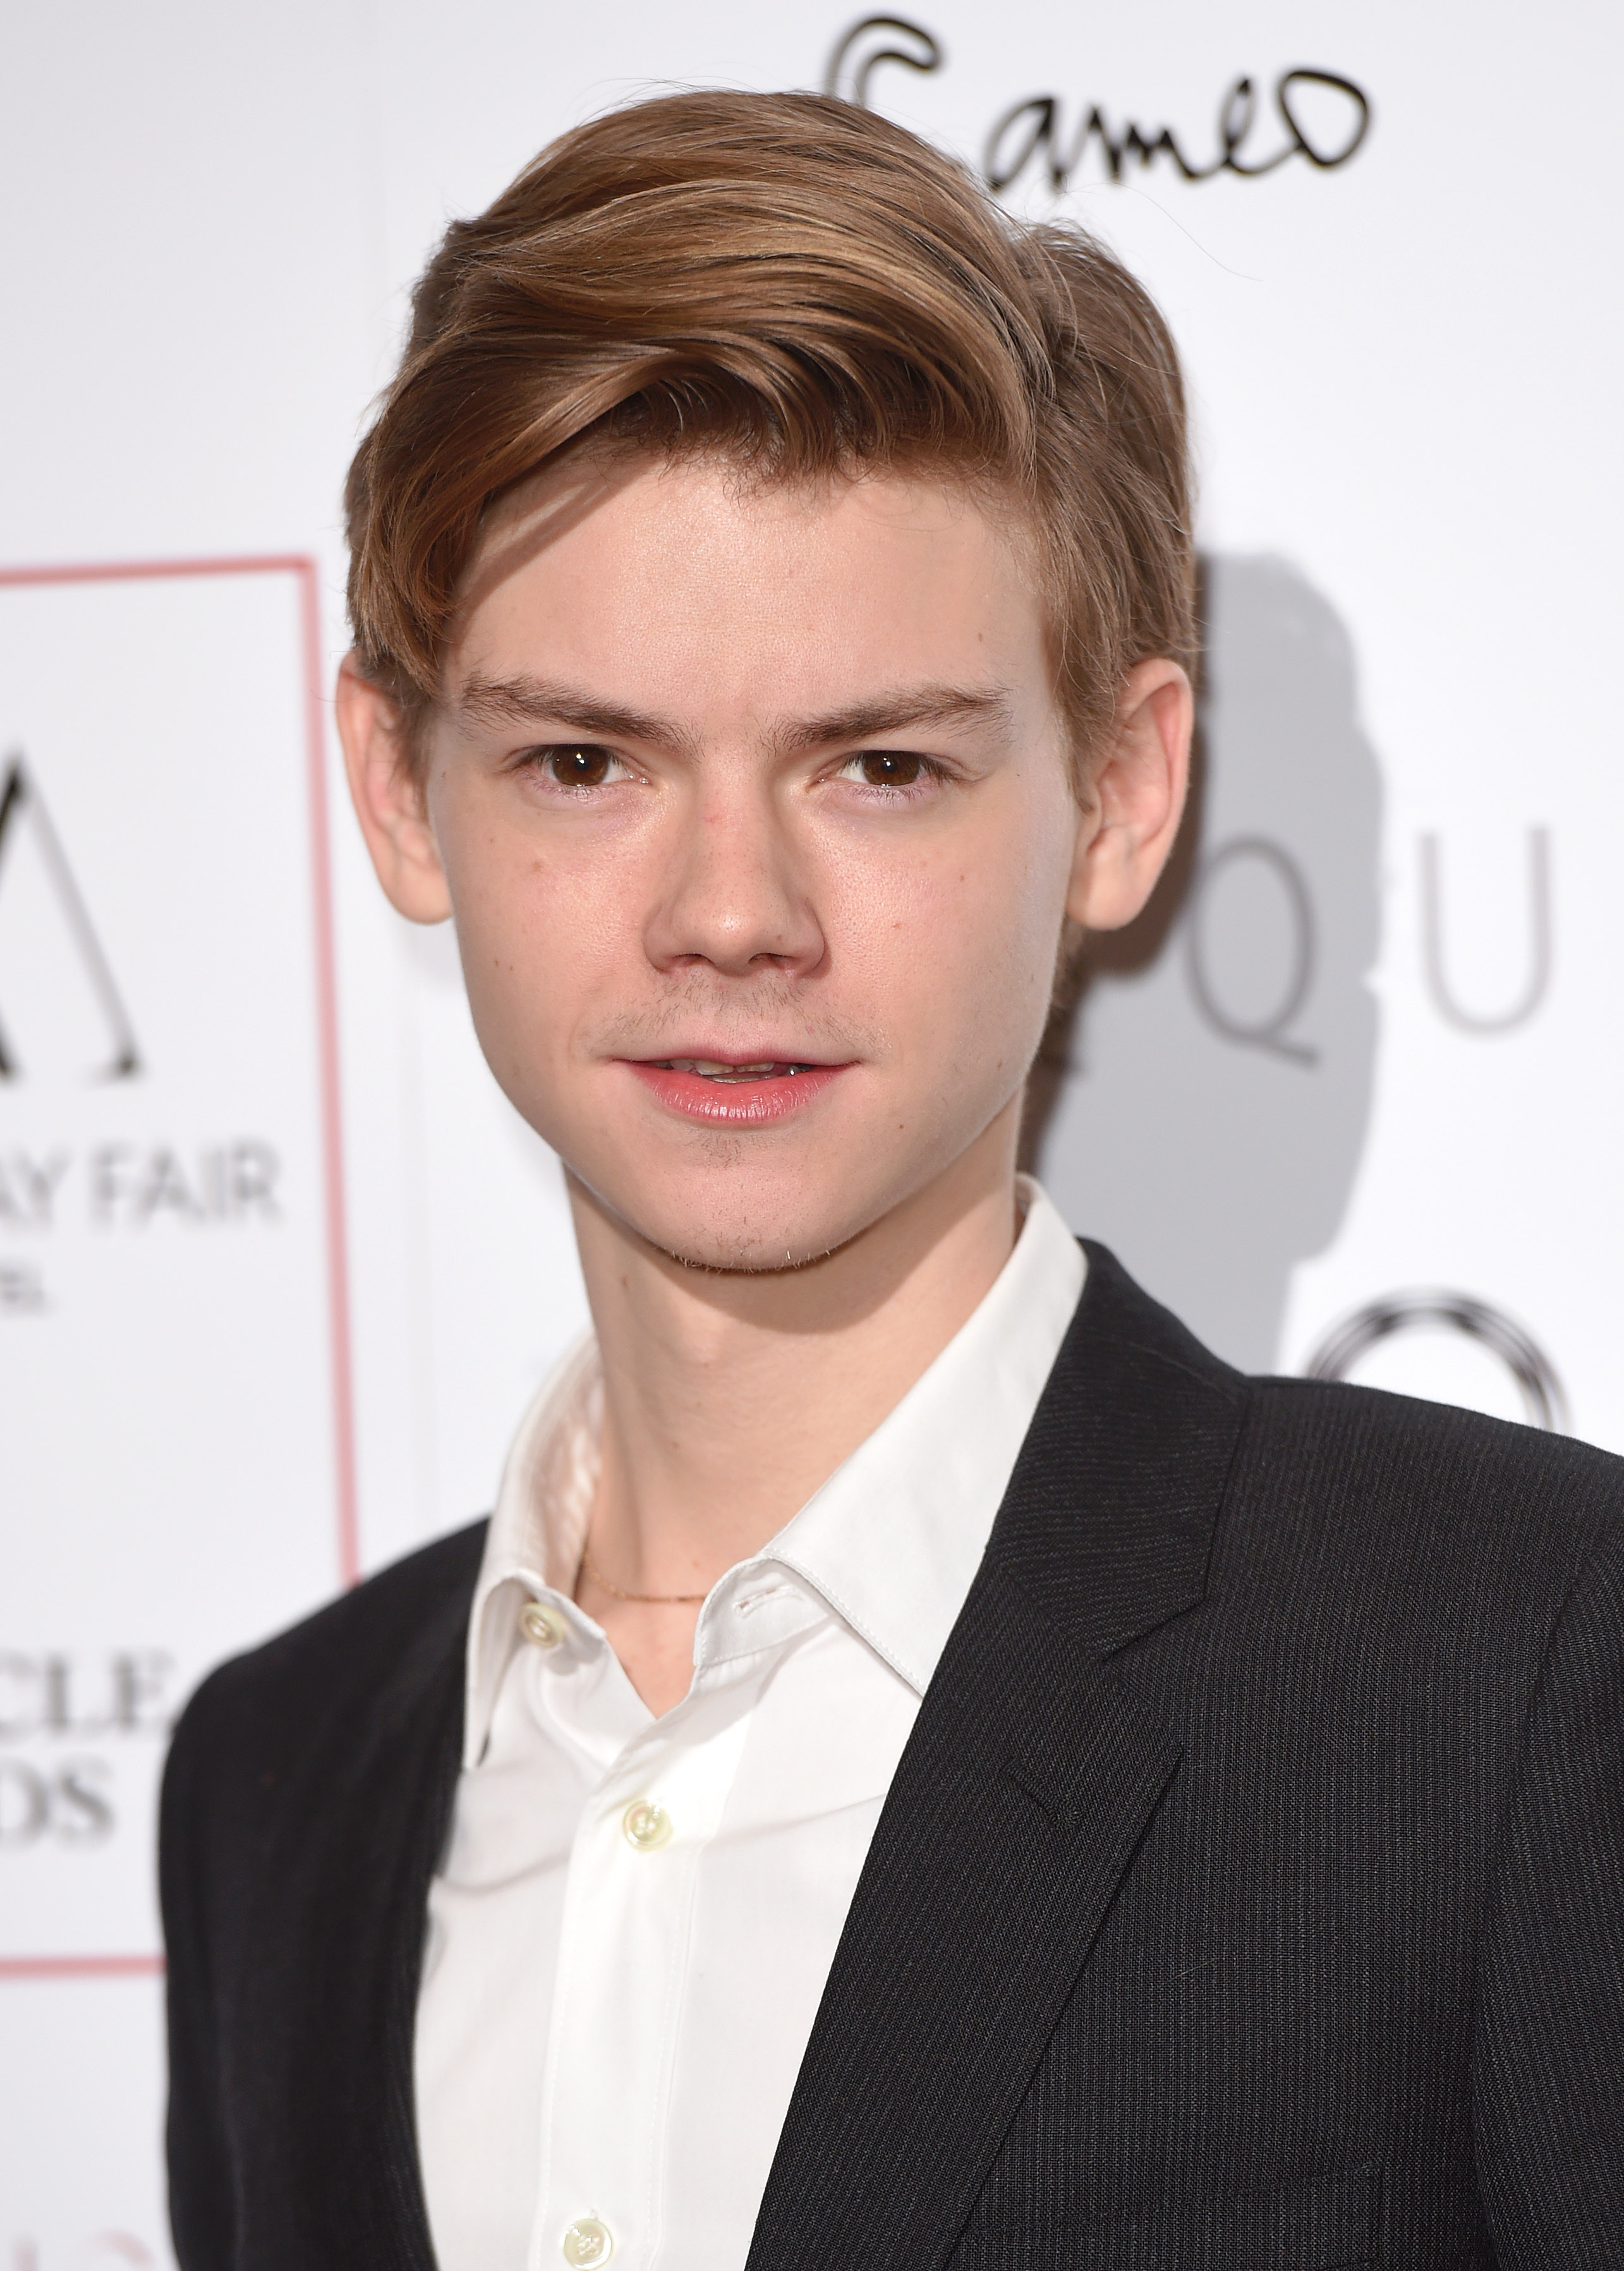 Thomas Brodie-Sangster besucht die London Critics' Circle Film Awards am 17. Januar 2016 in London, England | Quelle: Getty Images